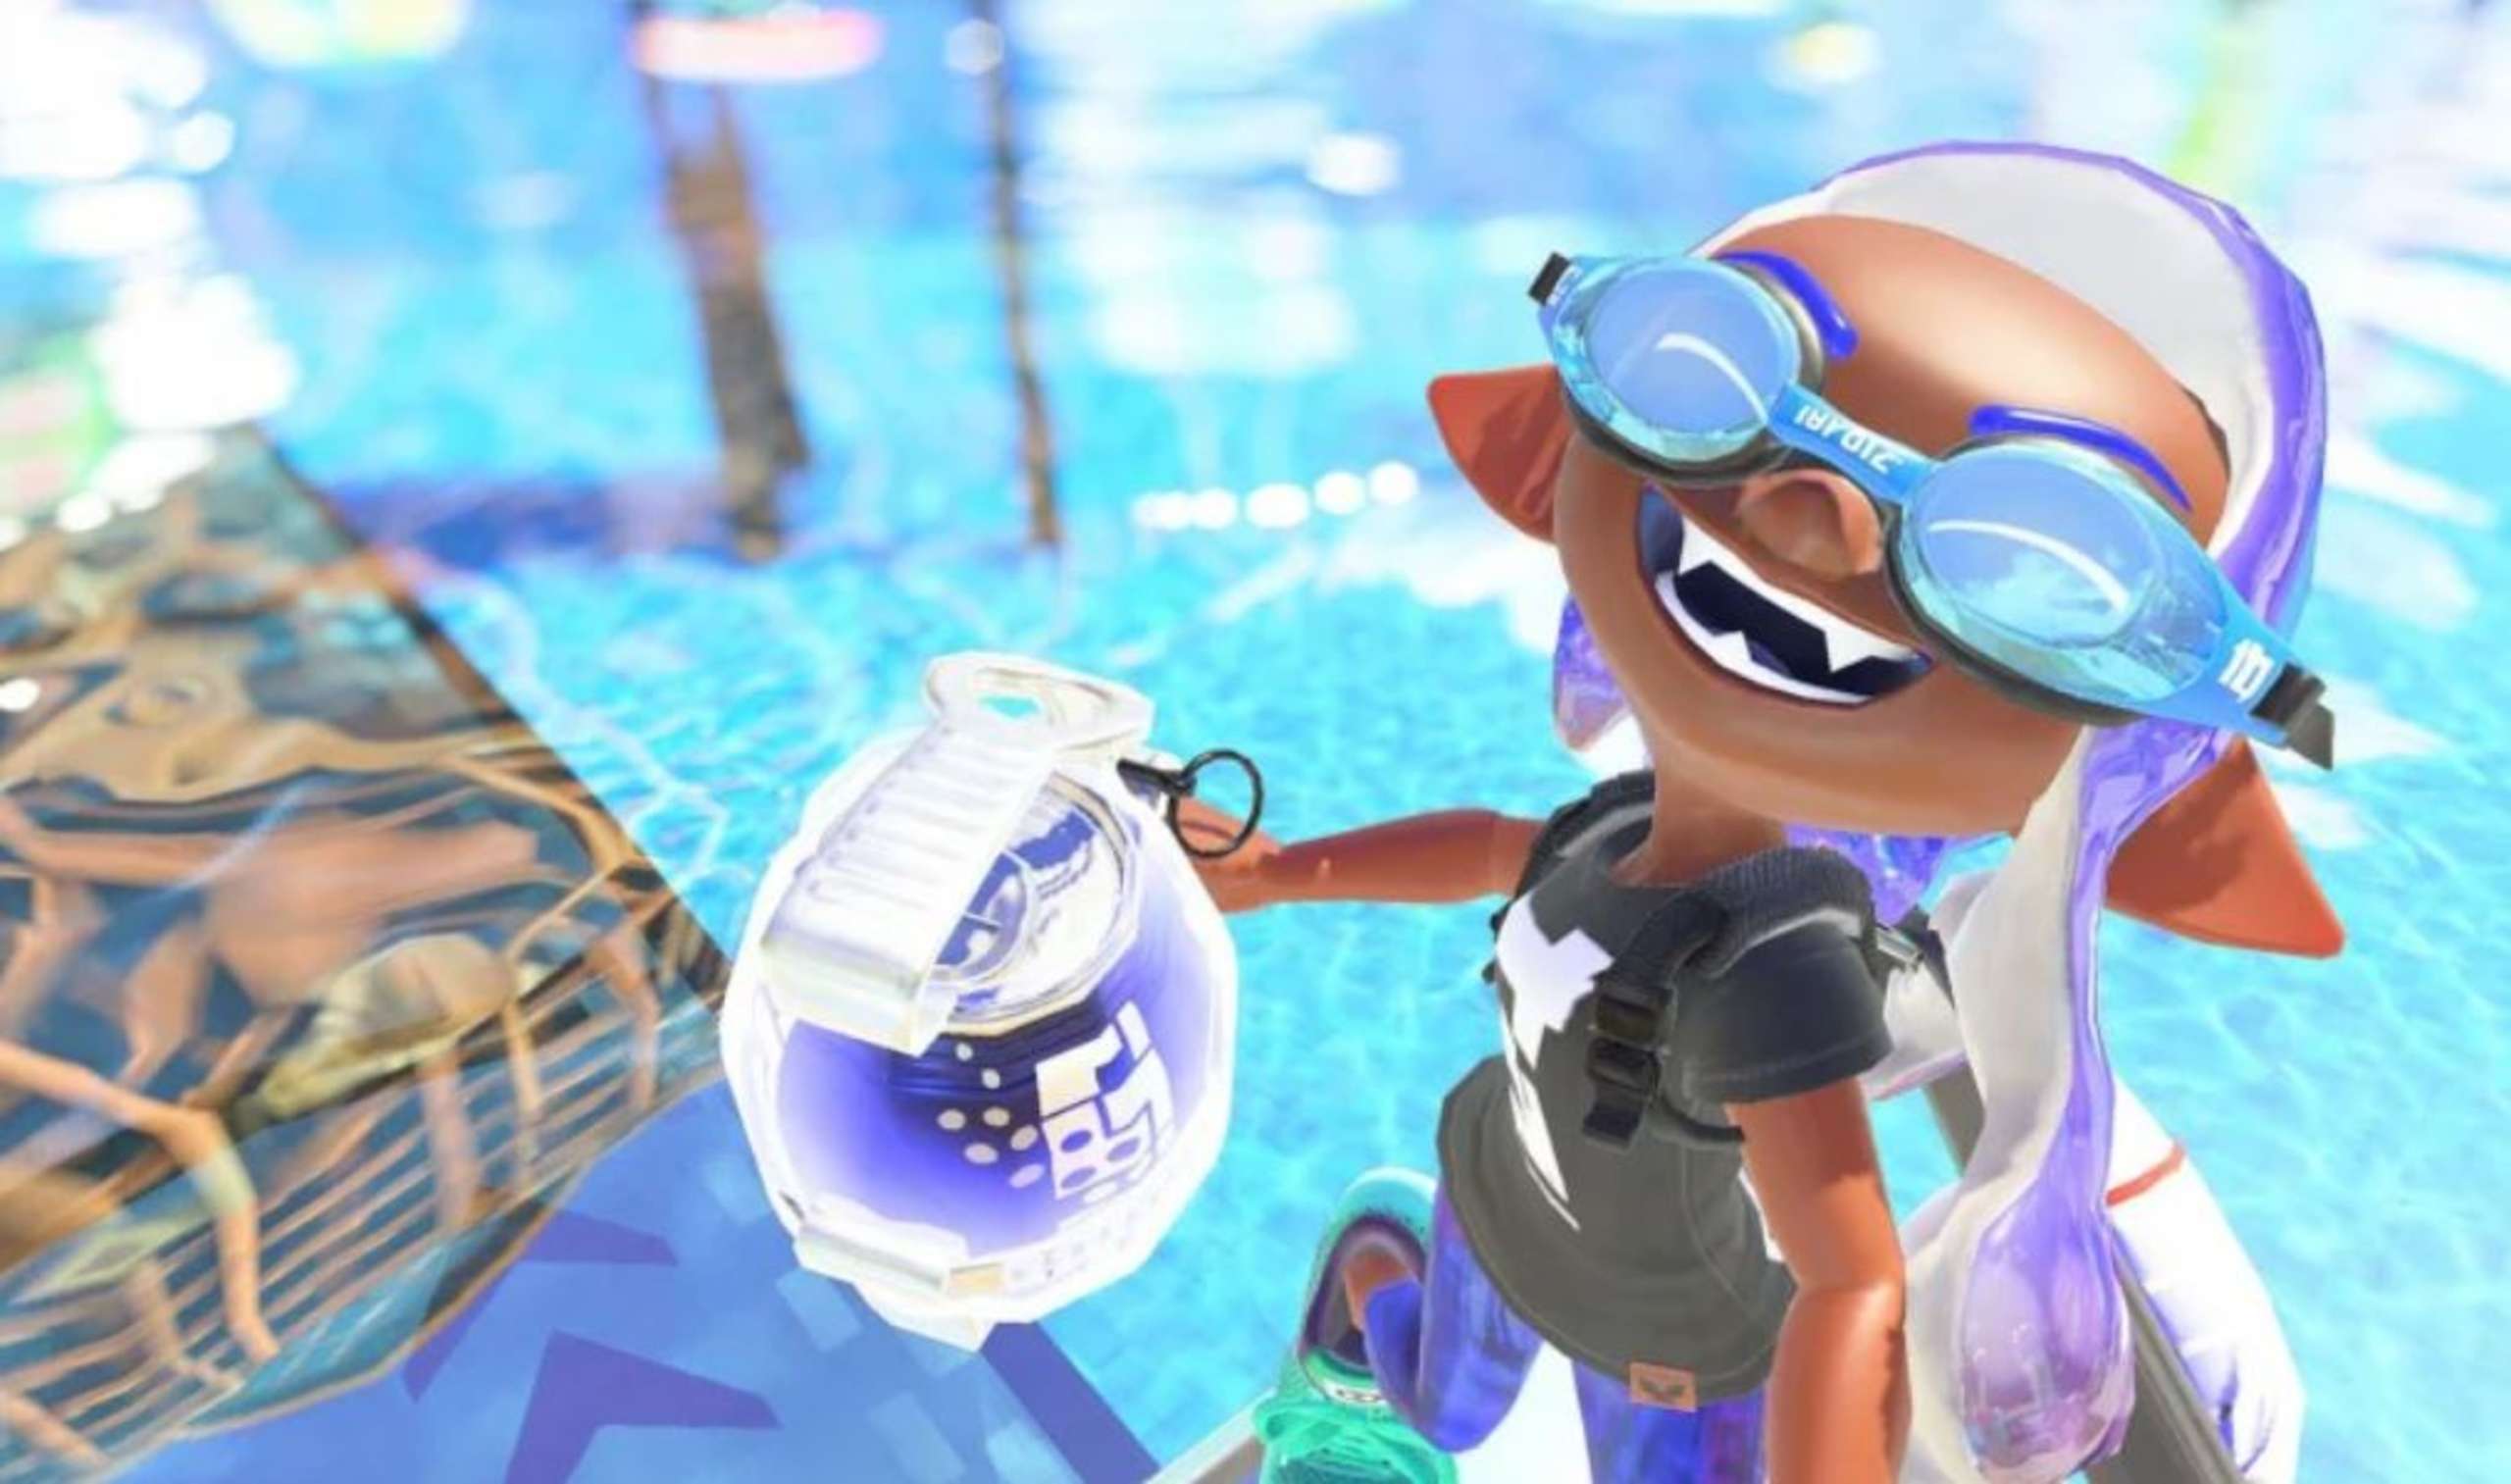 The Most Recent Patch For Splatoon 3 Addresses Some New Connectivity Issues And Allows Those Who Didn’t Participate In Splatfest To Get Their Hands On Some Sea Snails